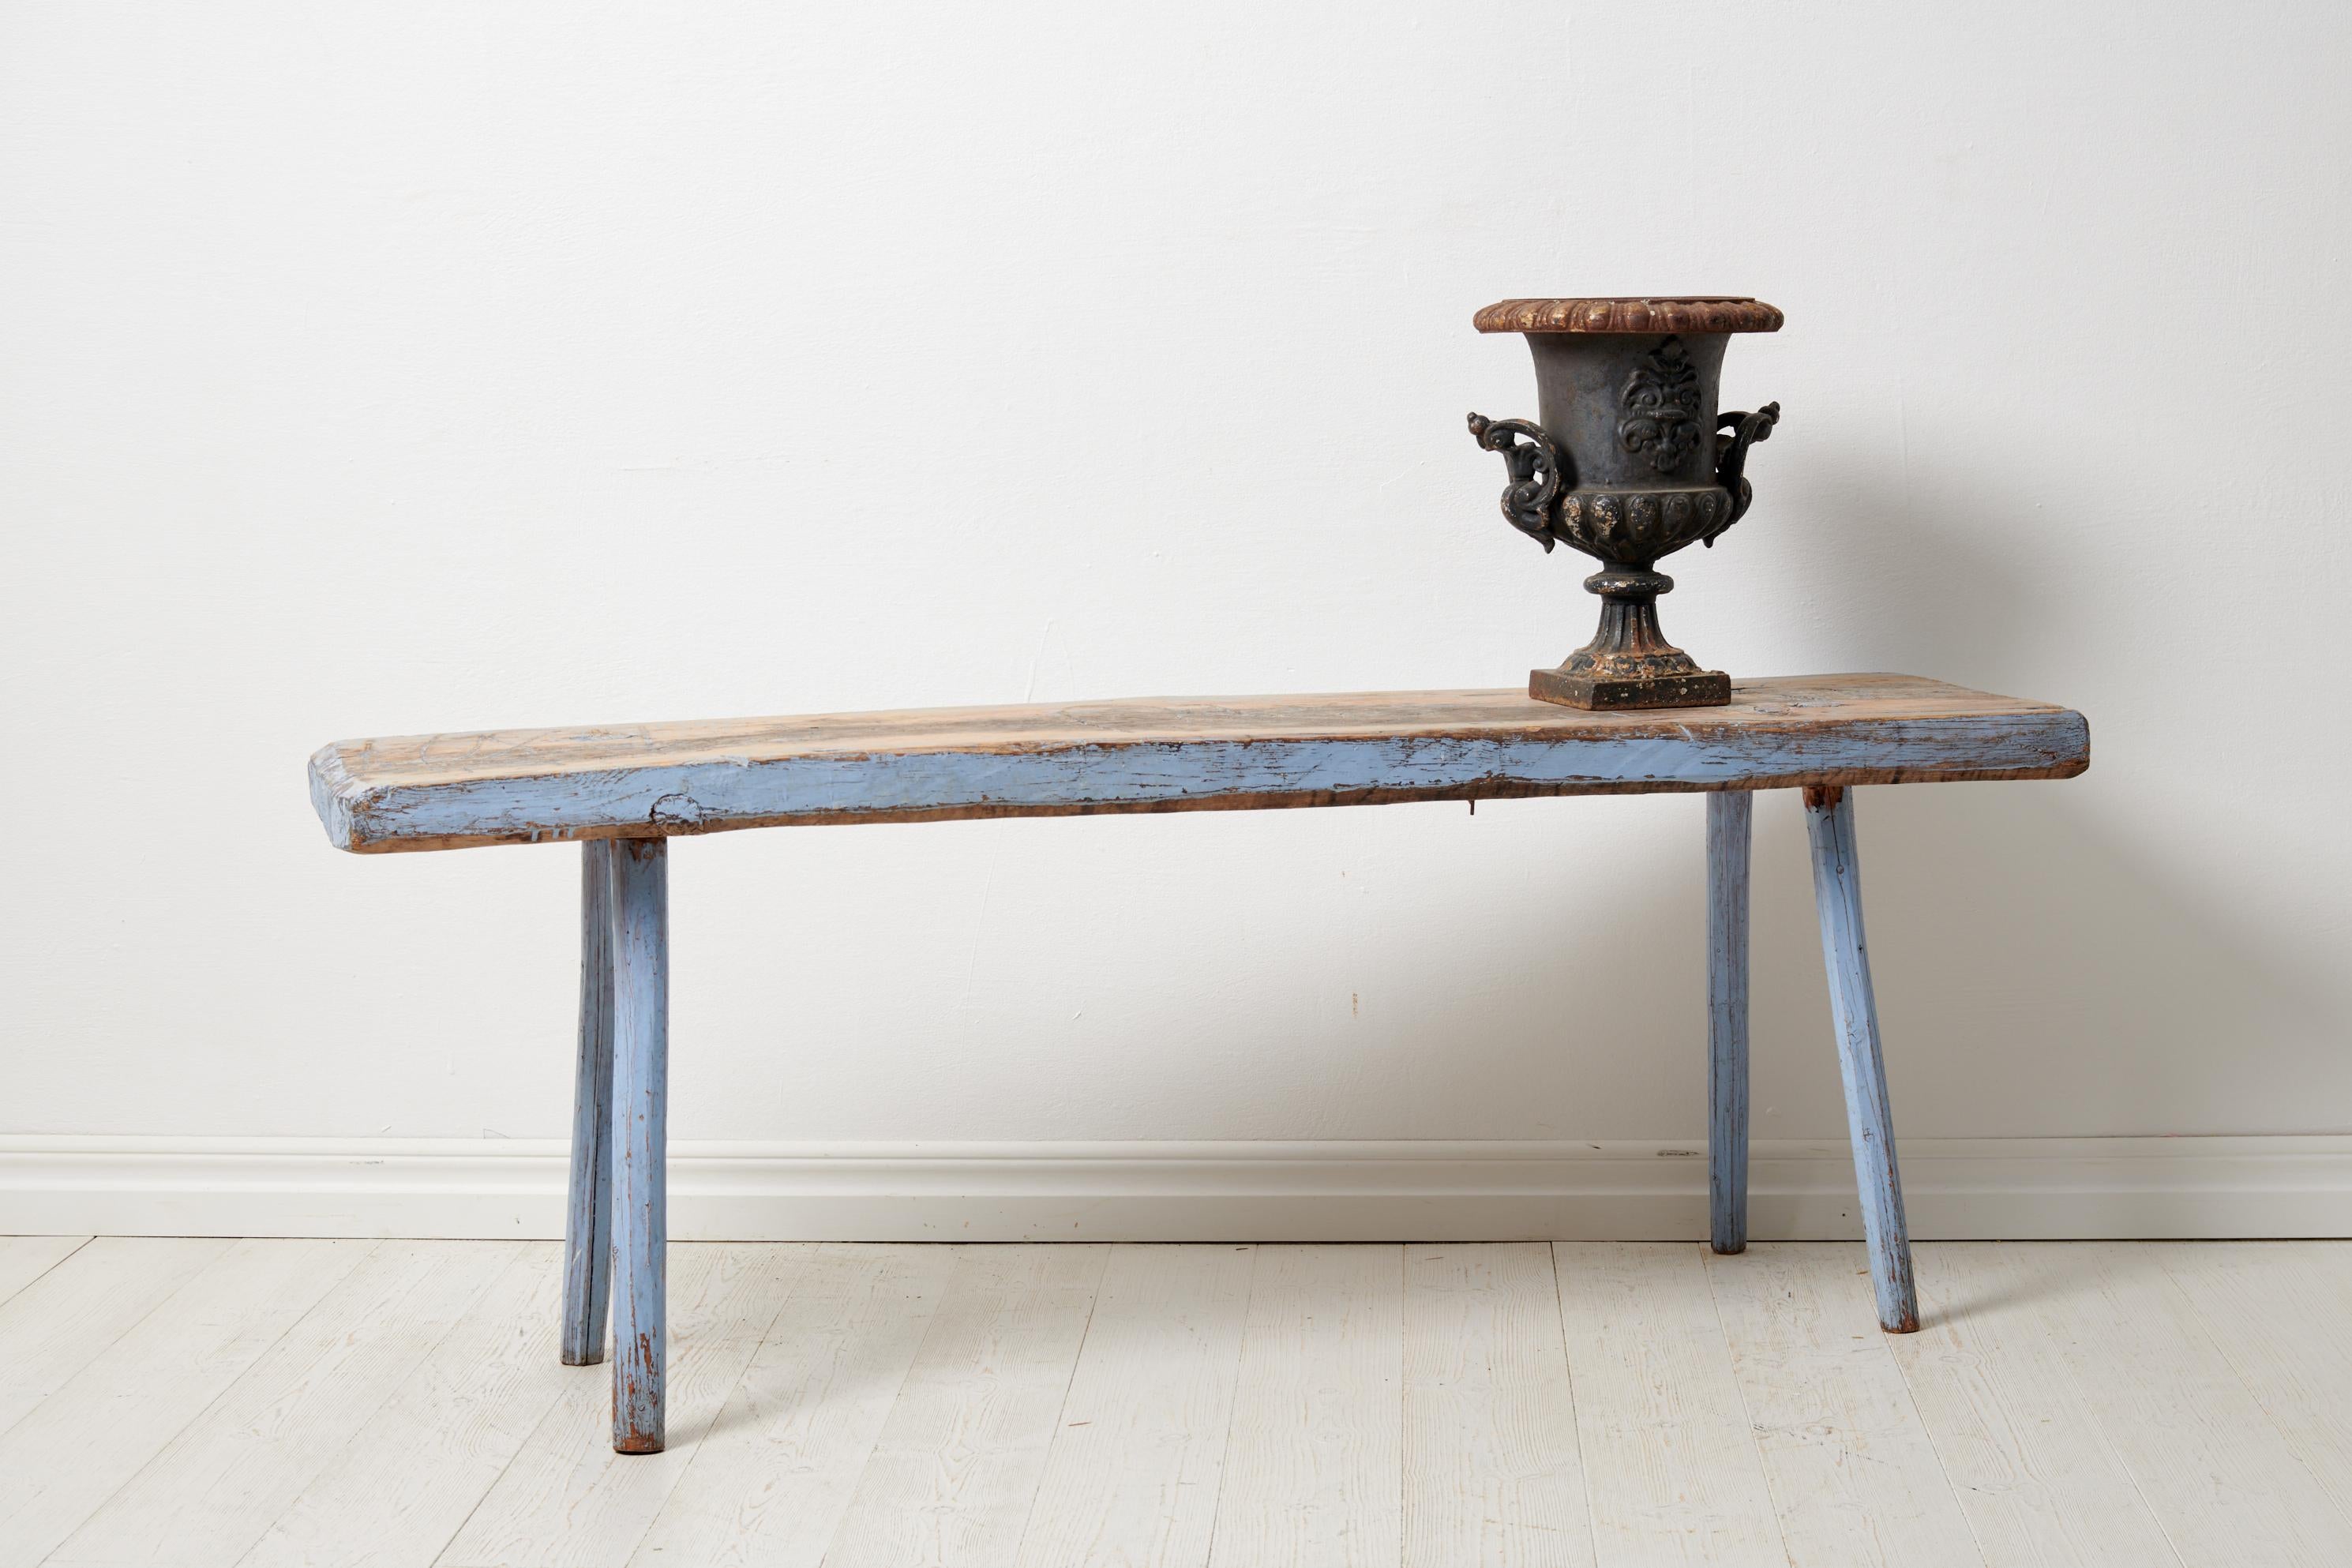 Primitive antique country bench from Sweden. The bench is a genuine country house furniture made by hand in solid pine. The bench has old historic paint which has become distressed with time making the unique patina it has today. There are also